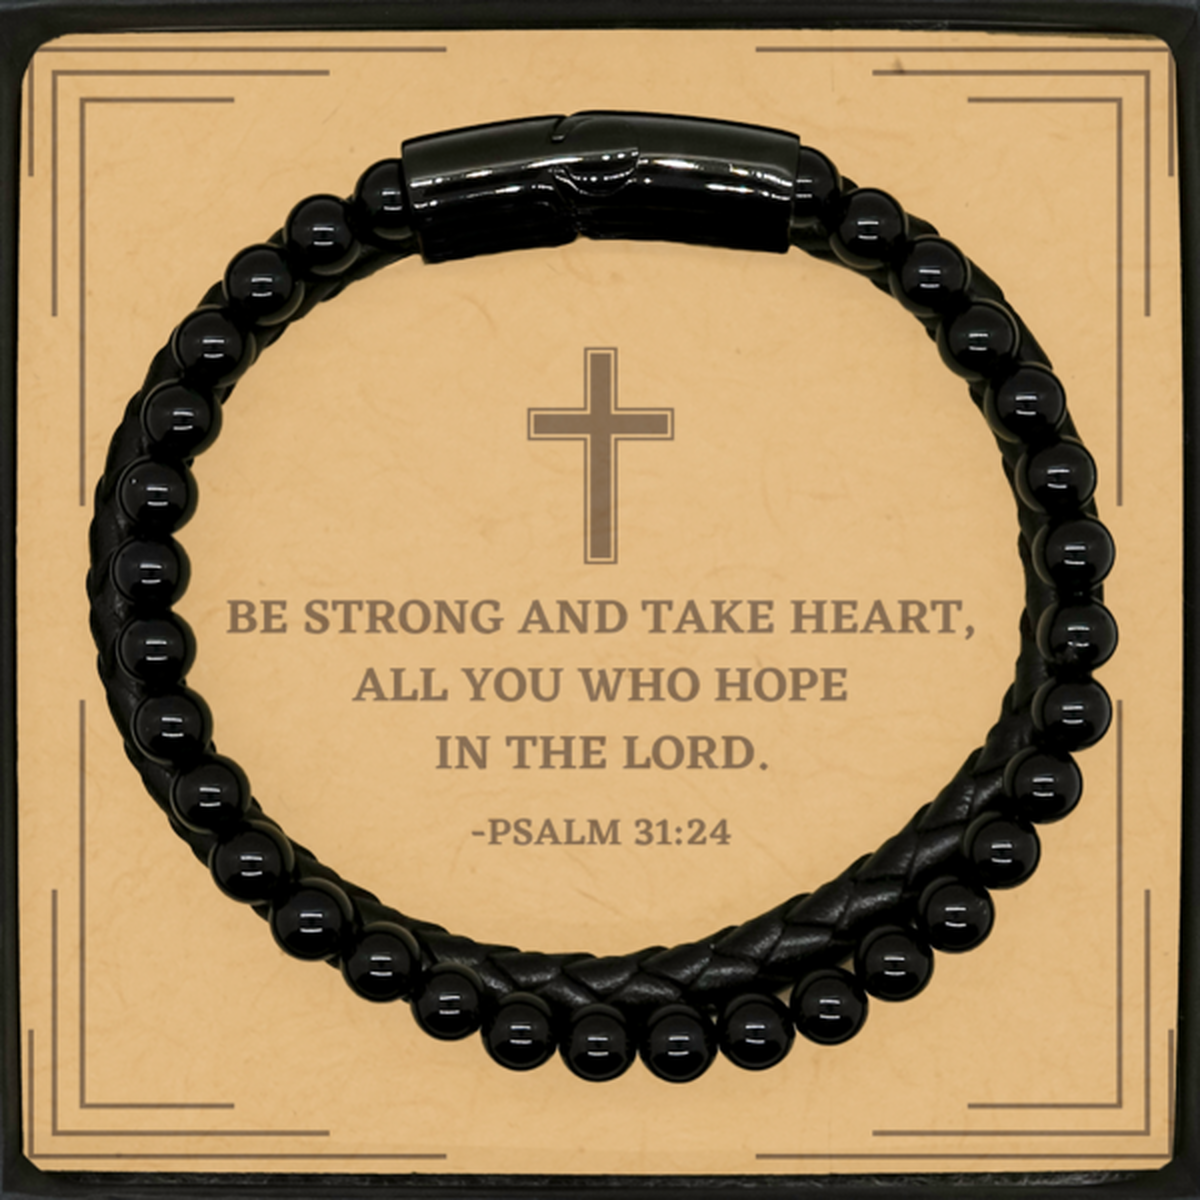 Baptism Gifts For Teenage Boys Girls, Christian Bible Verse Stone Leather Bracelet, Be strong and take heart, Confirmation Gifts, Bible Verse Card for Son, Godson, Grandson